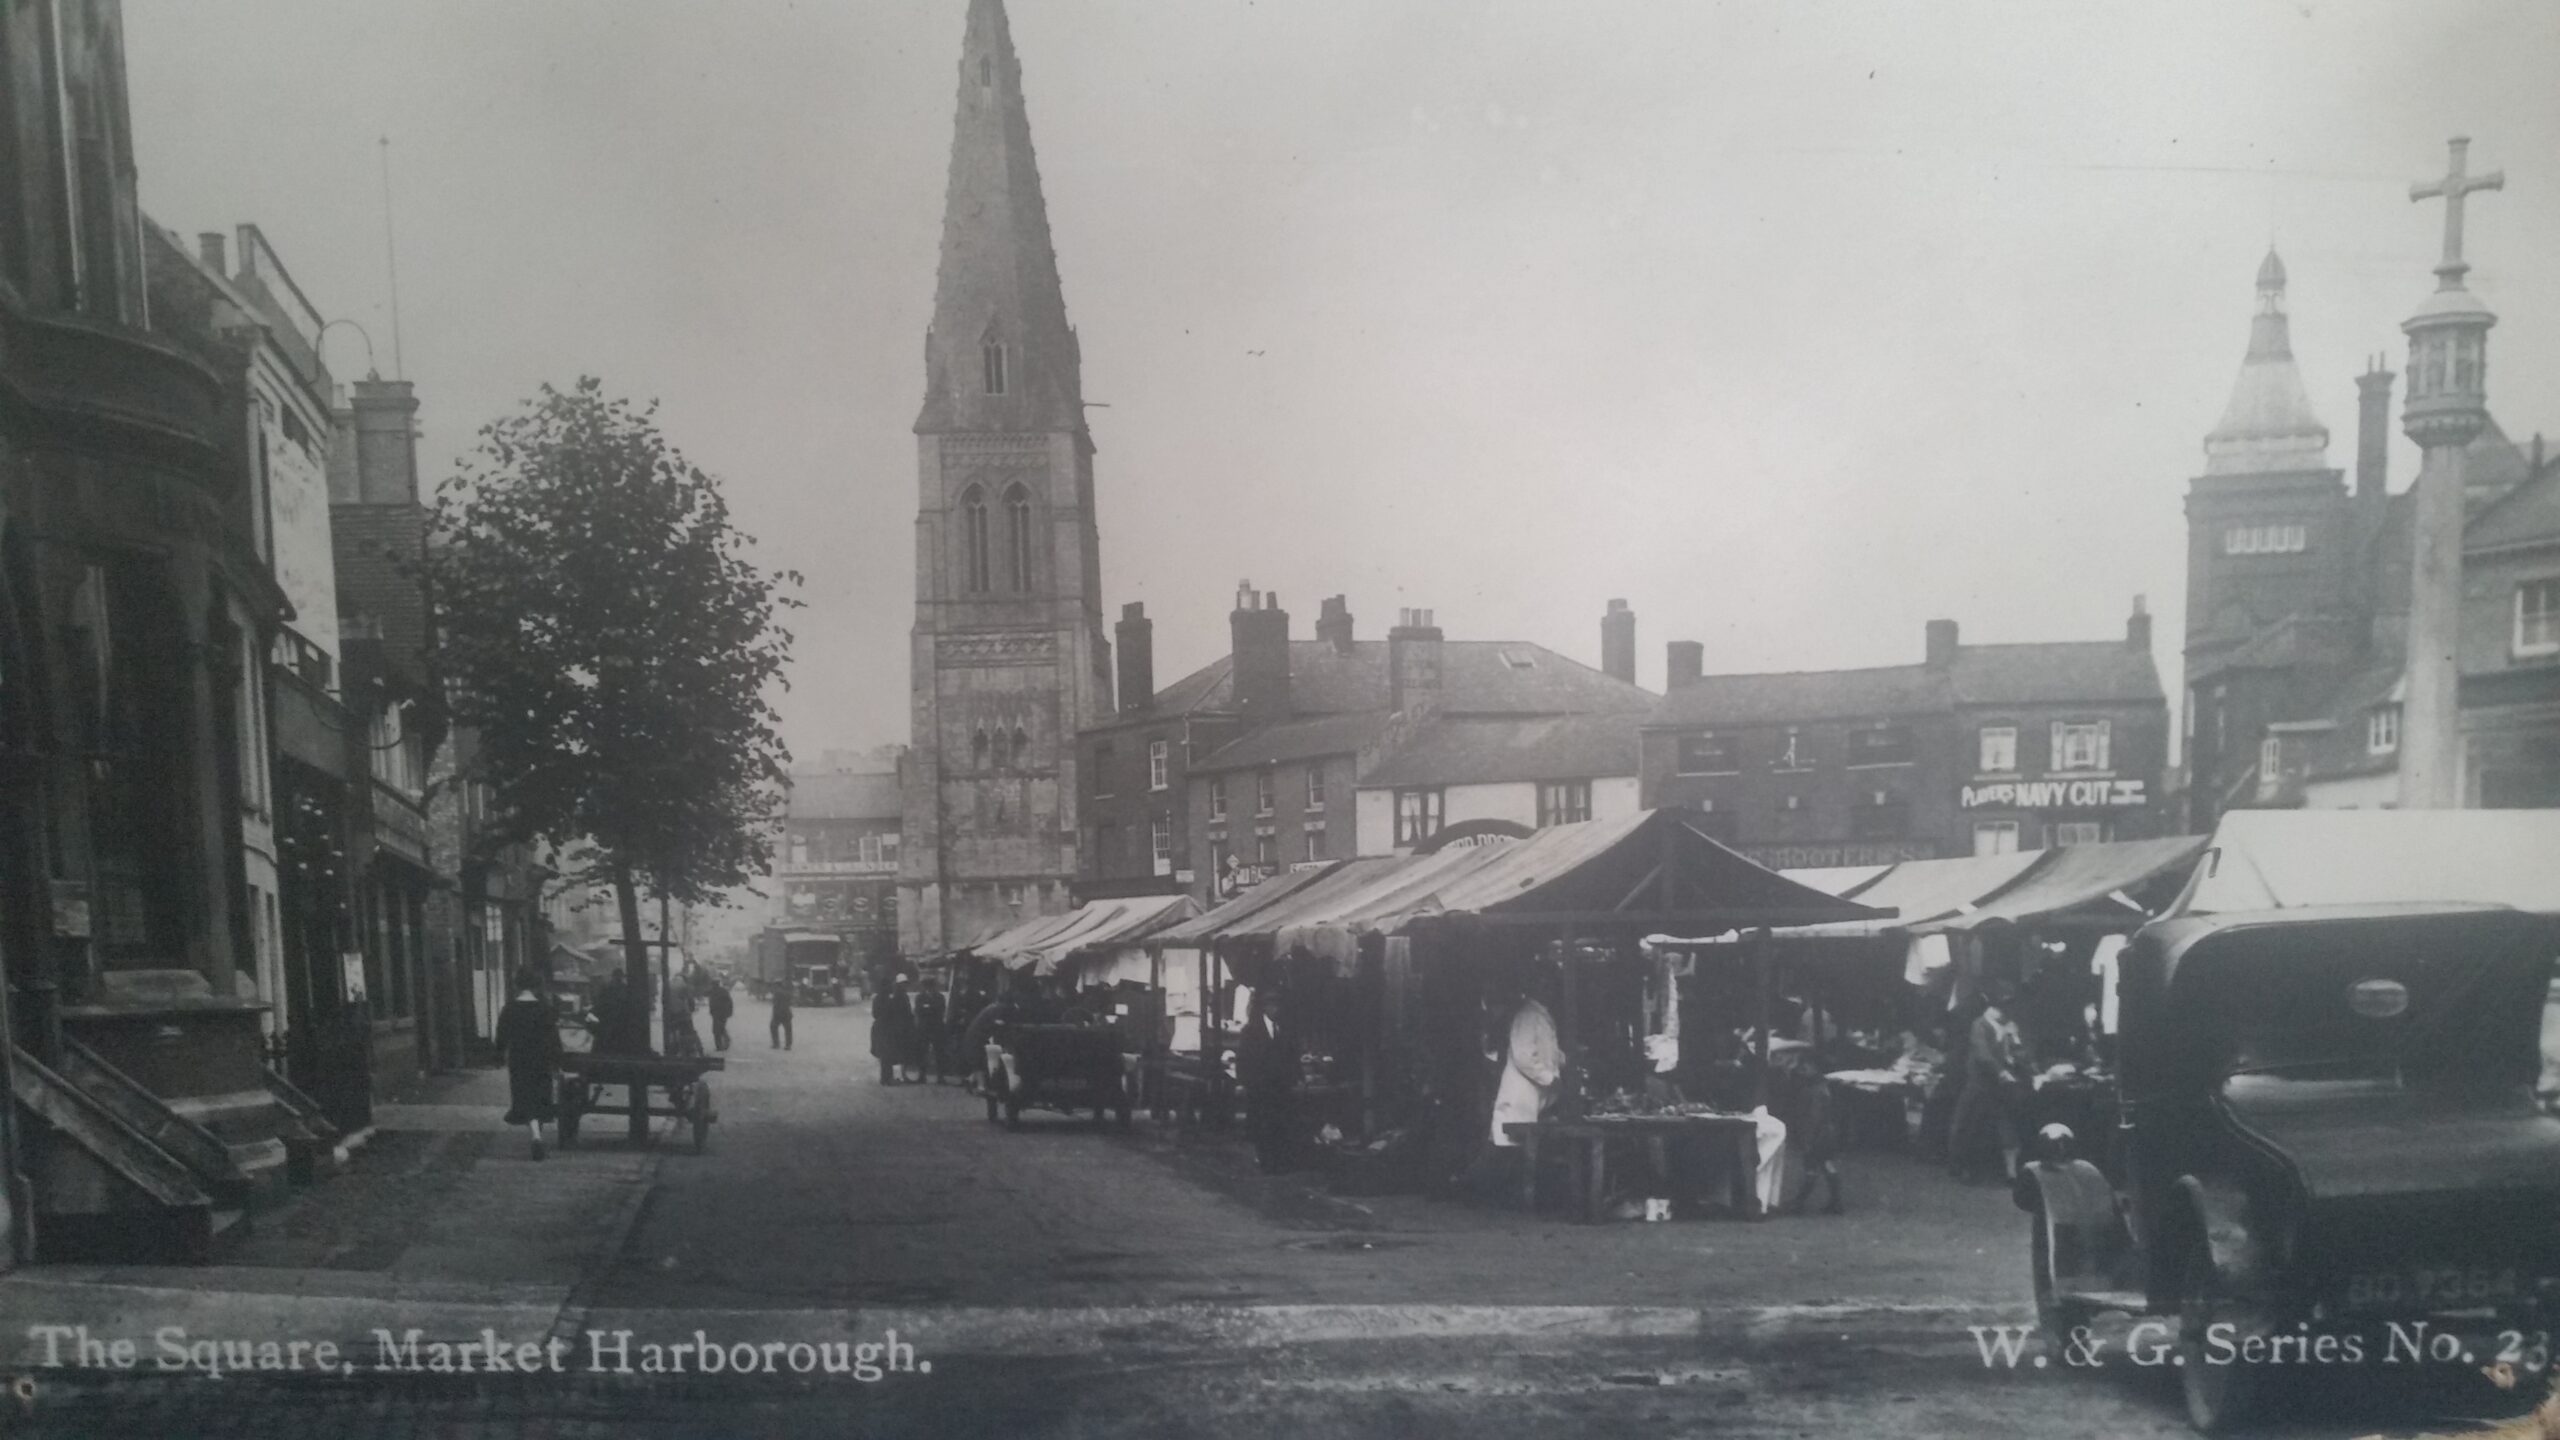 Old images of Market Harborough Sqaure